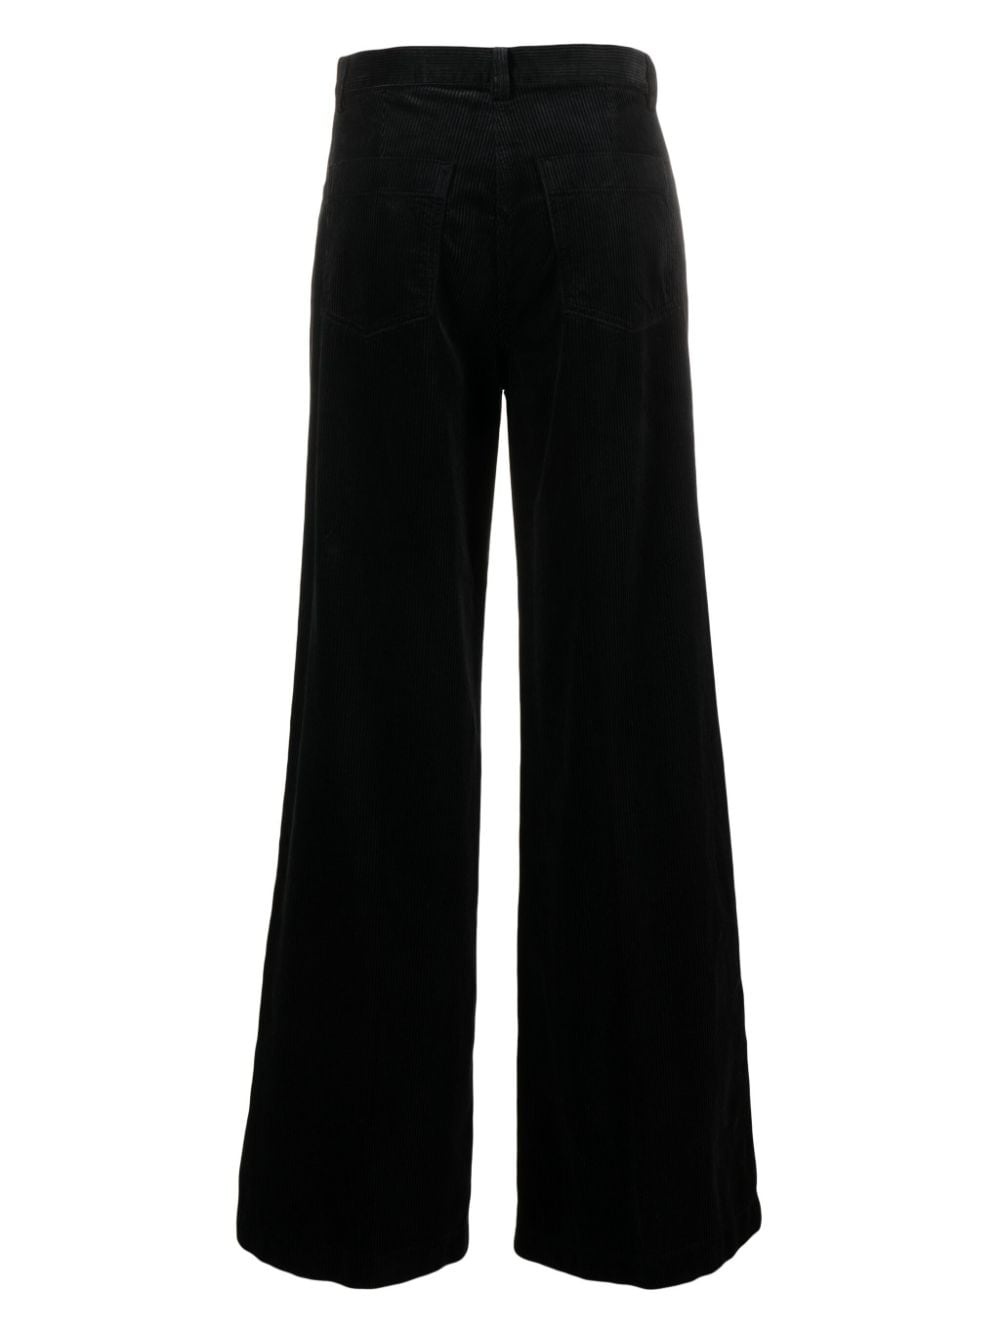 corduroy flared cotton trousers - 2